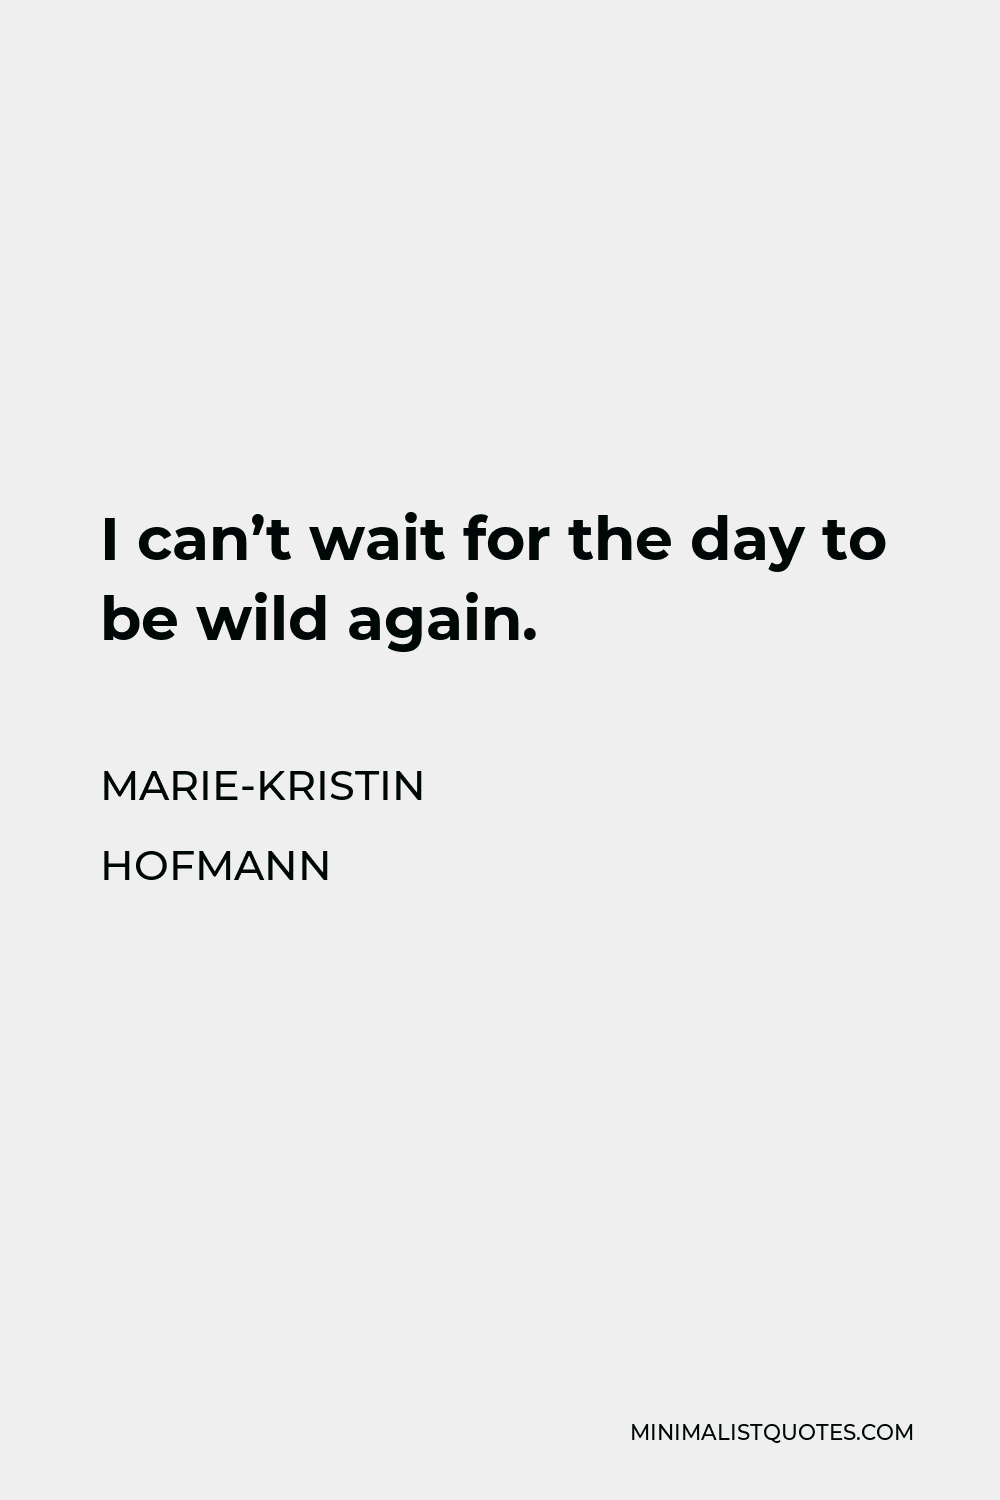 Marie-Kristin Hofmann Quote - I can’t wait for the day to be wild again.